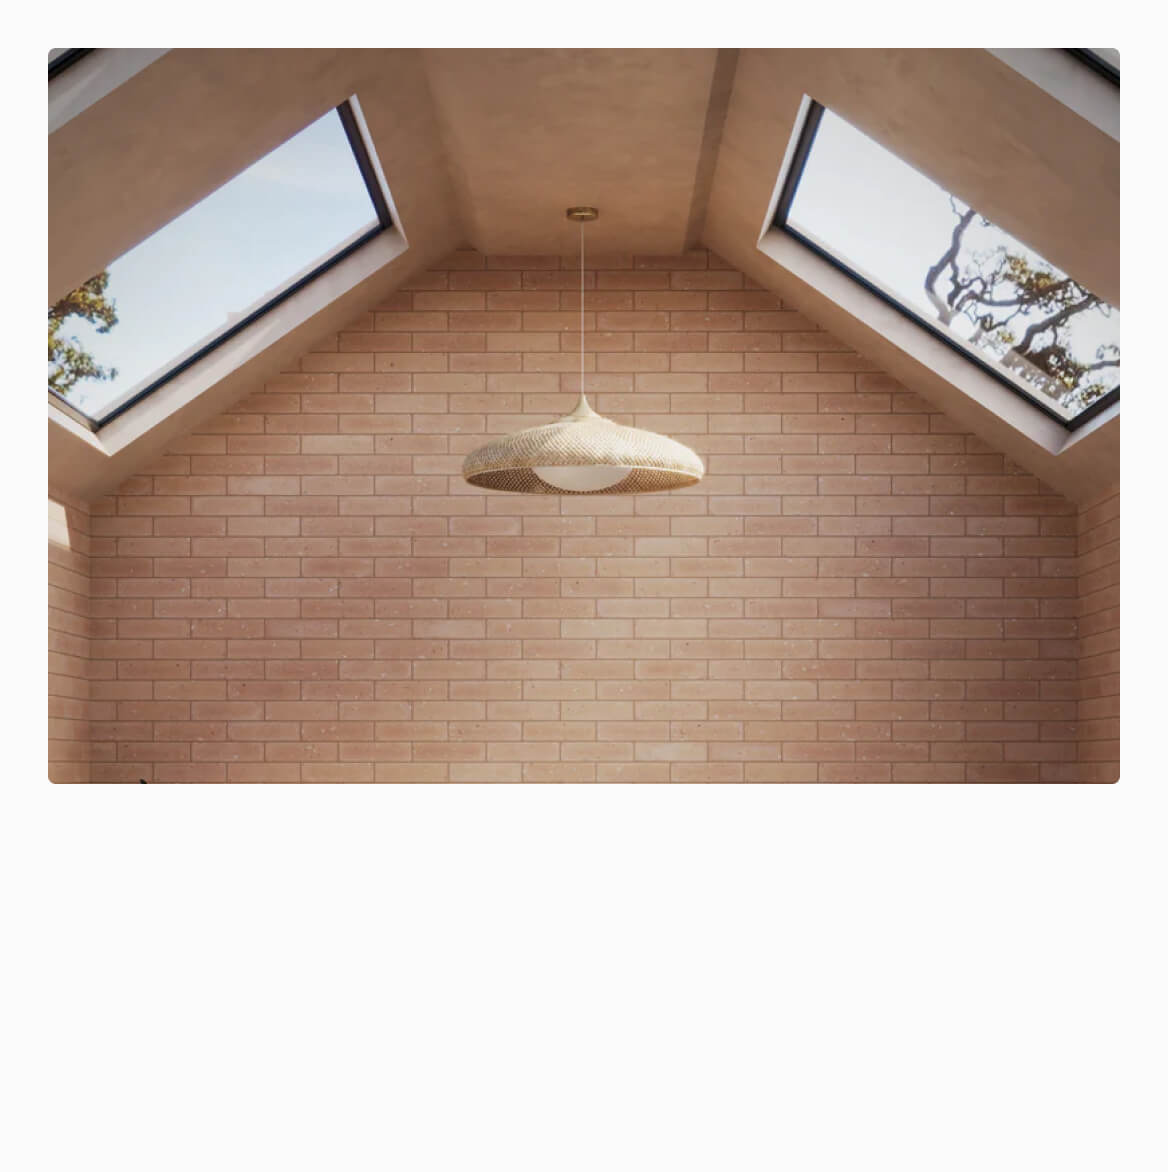 Vaulted ceiling with skylights casting natural light on warm brick-look wall tiles